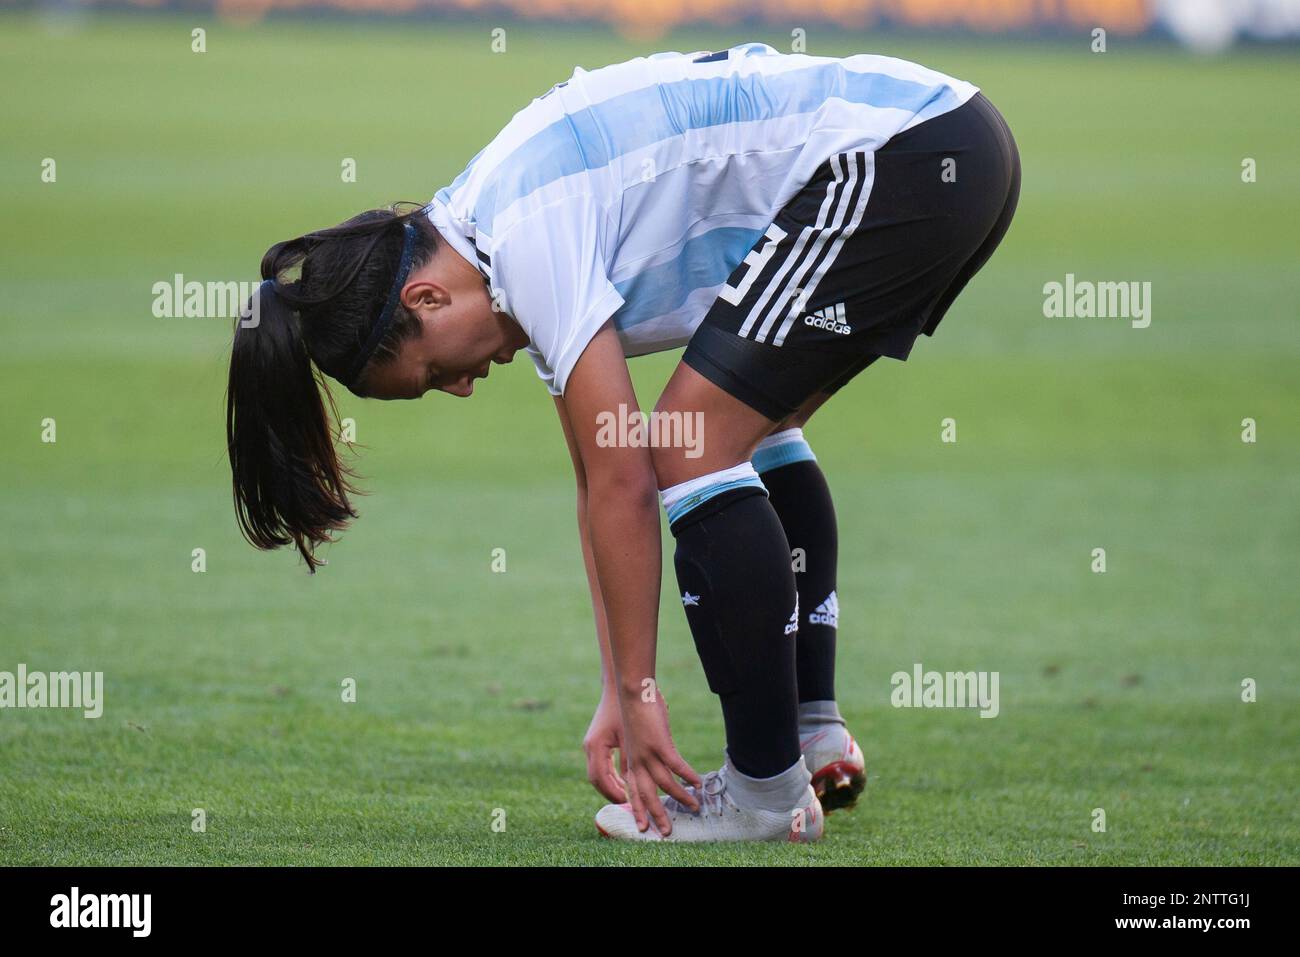 MELBOURNE, VIC - MARCH 06: Eliana Stabile (3) of Argentina checks her foot  during The Cup of Nations womens soccer match between Australia and  Argentina on March 06, 2019 at AAMI Park,